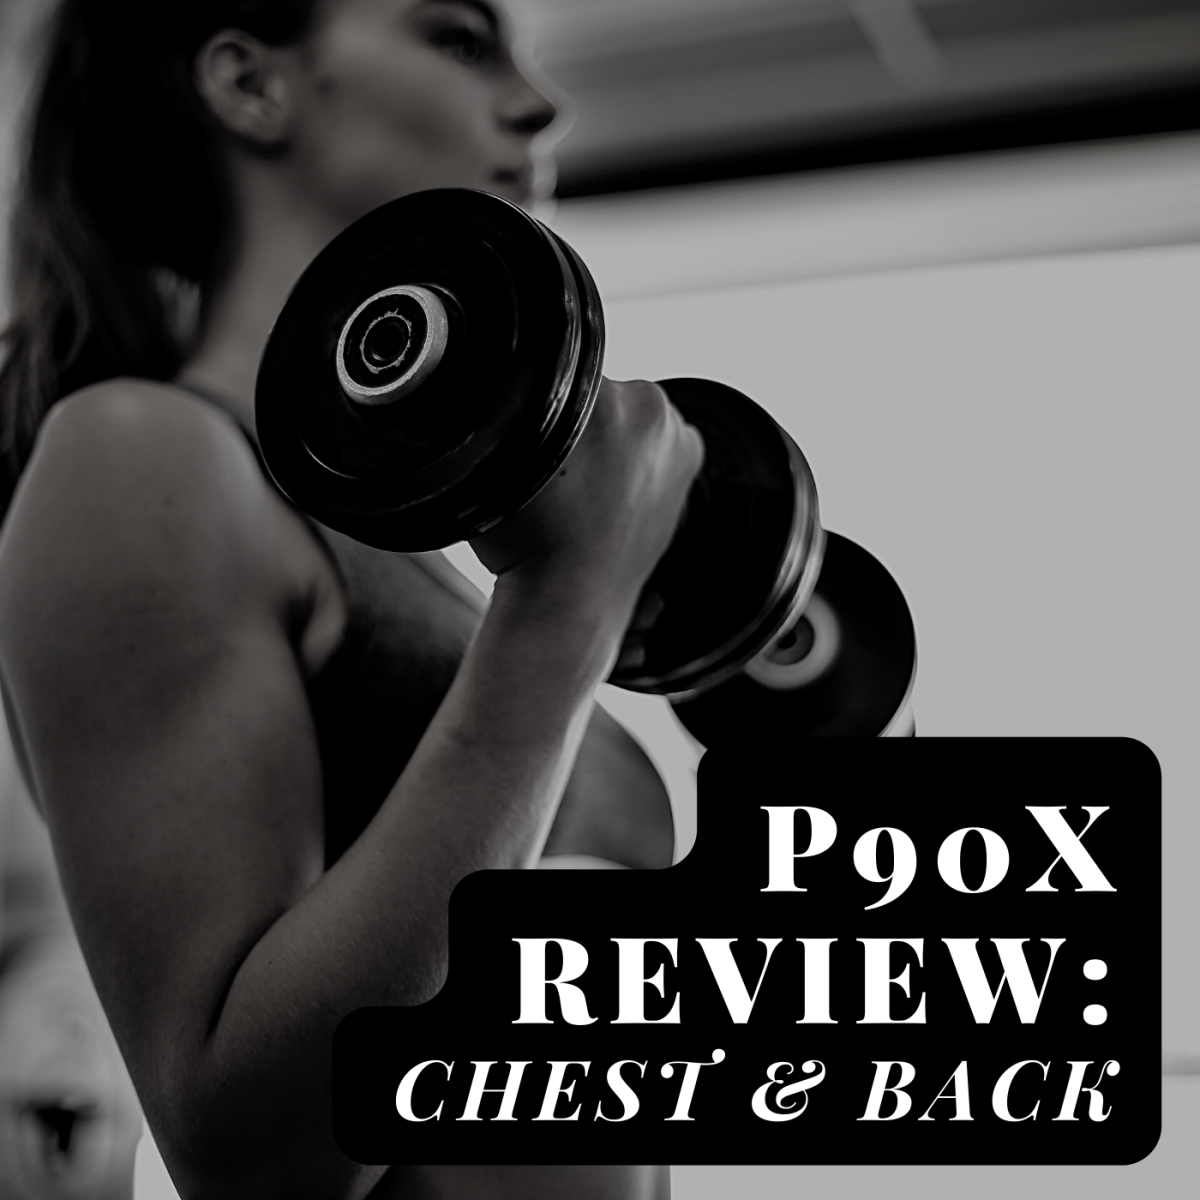 A thorough review of P90X's chest and back program